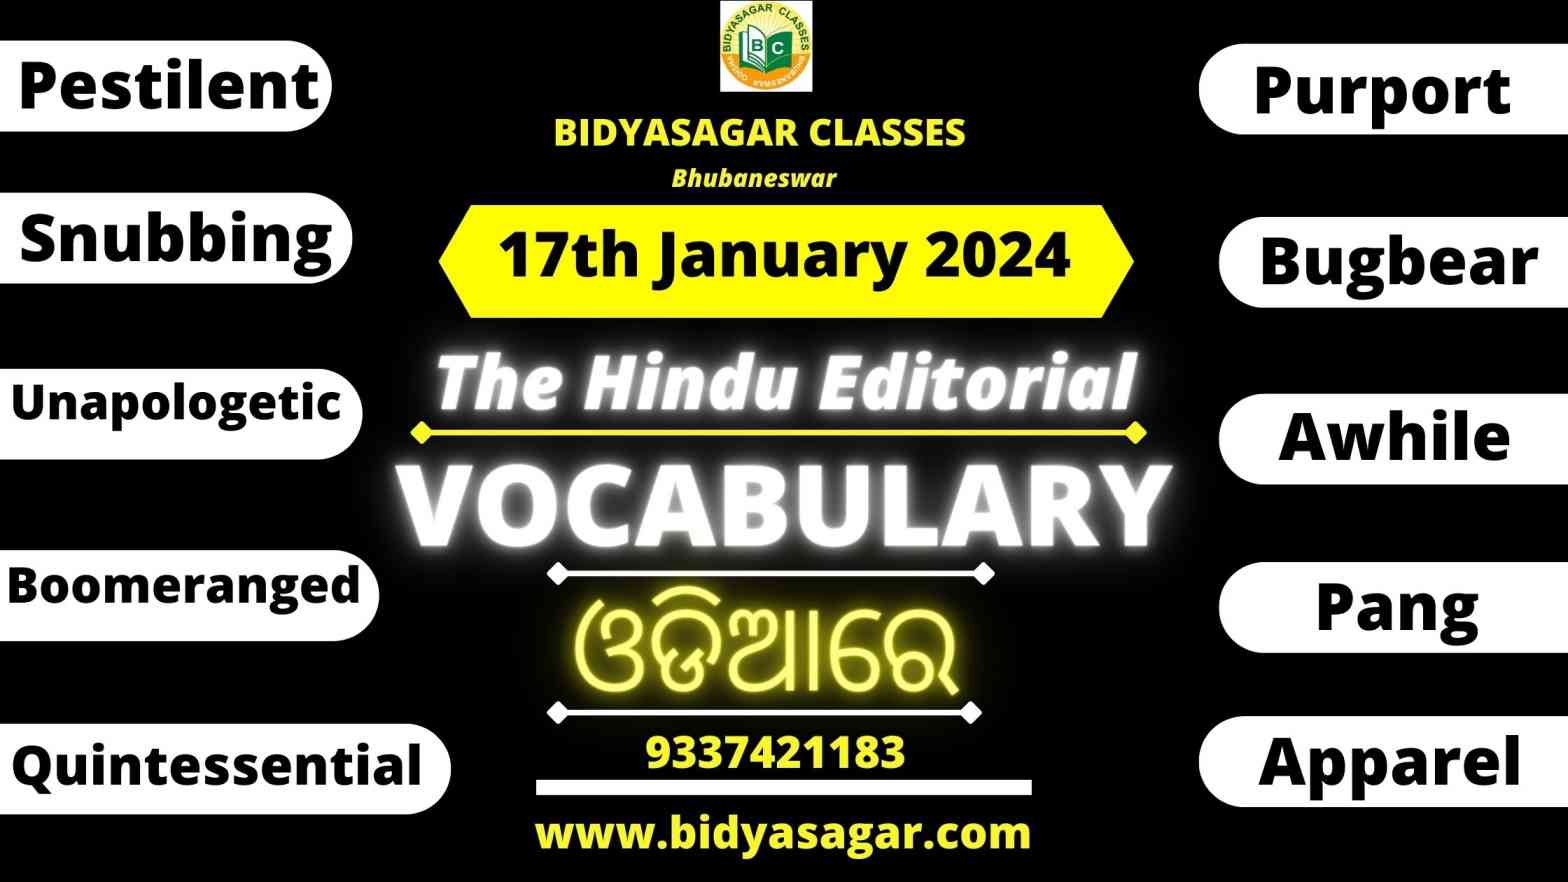 The Hindu Editorial Vocabulary of 17th January 2024